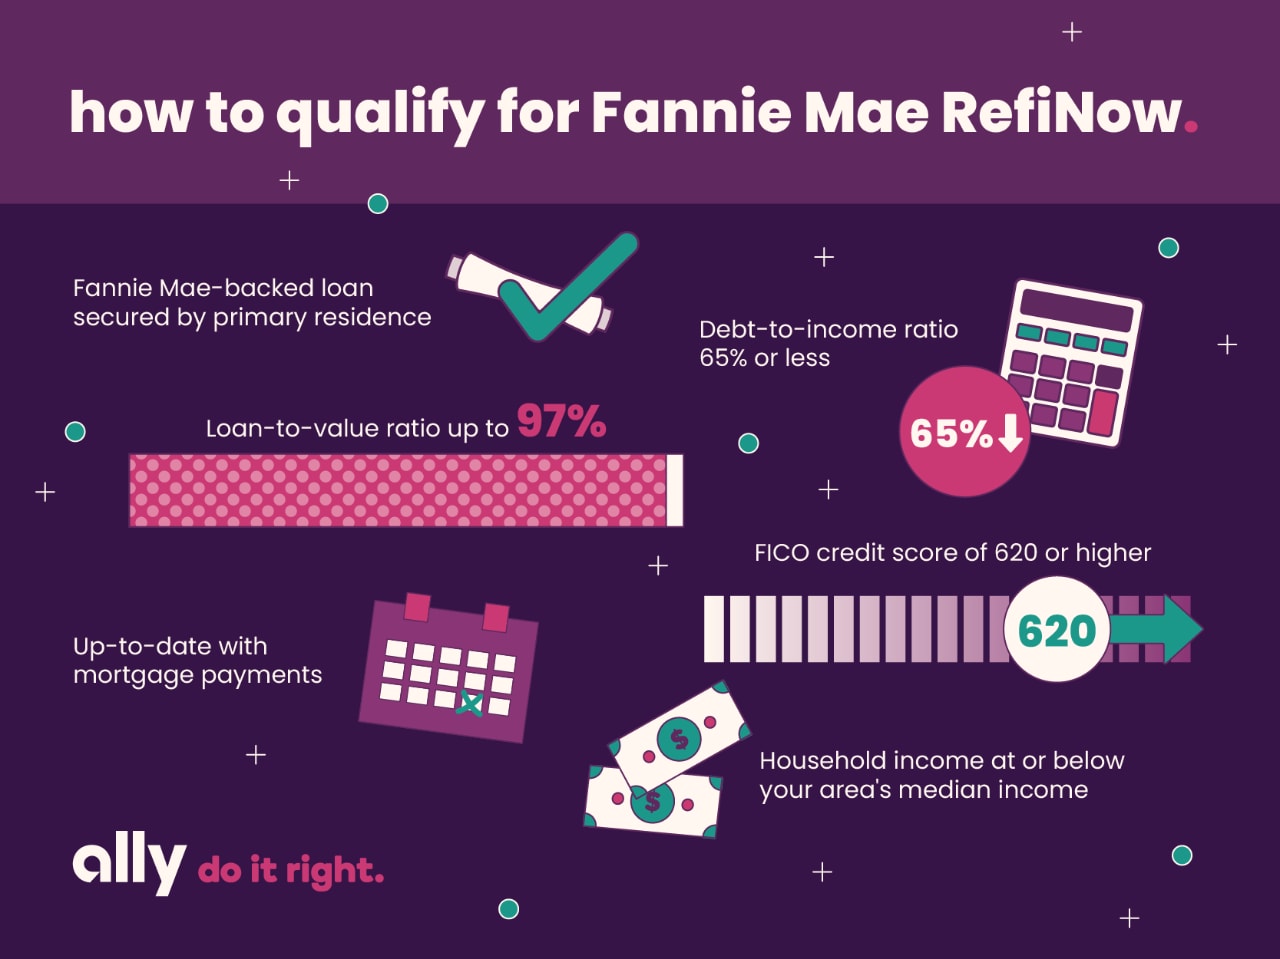 How to qualify for Fannie Mae RefiNow. Fannie Mae-backed loan secured by primary residence. Loan-to-value ratio up to 97%. Debt-to-income ratio 65% or less. Fico credit score of 620 or higher. Up-to-date with mortgage payments. Household income at or below your area's median income. Ally do it right.